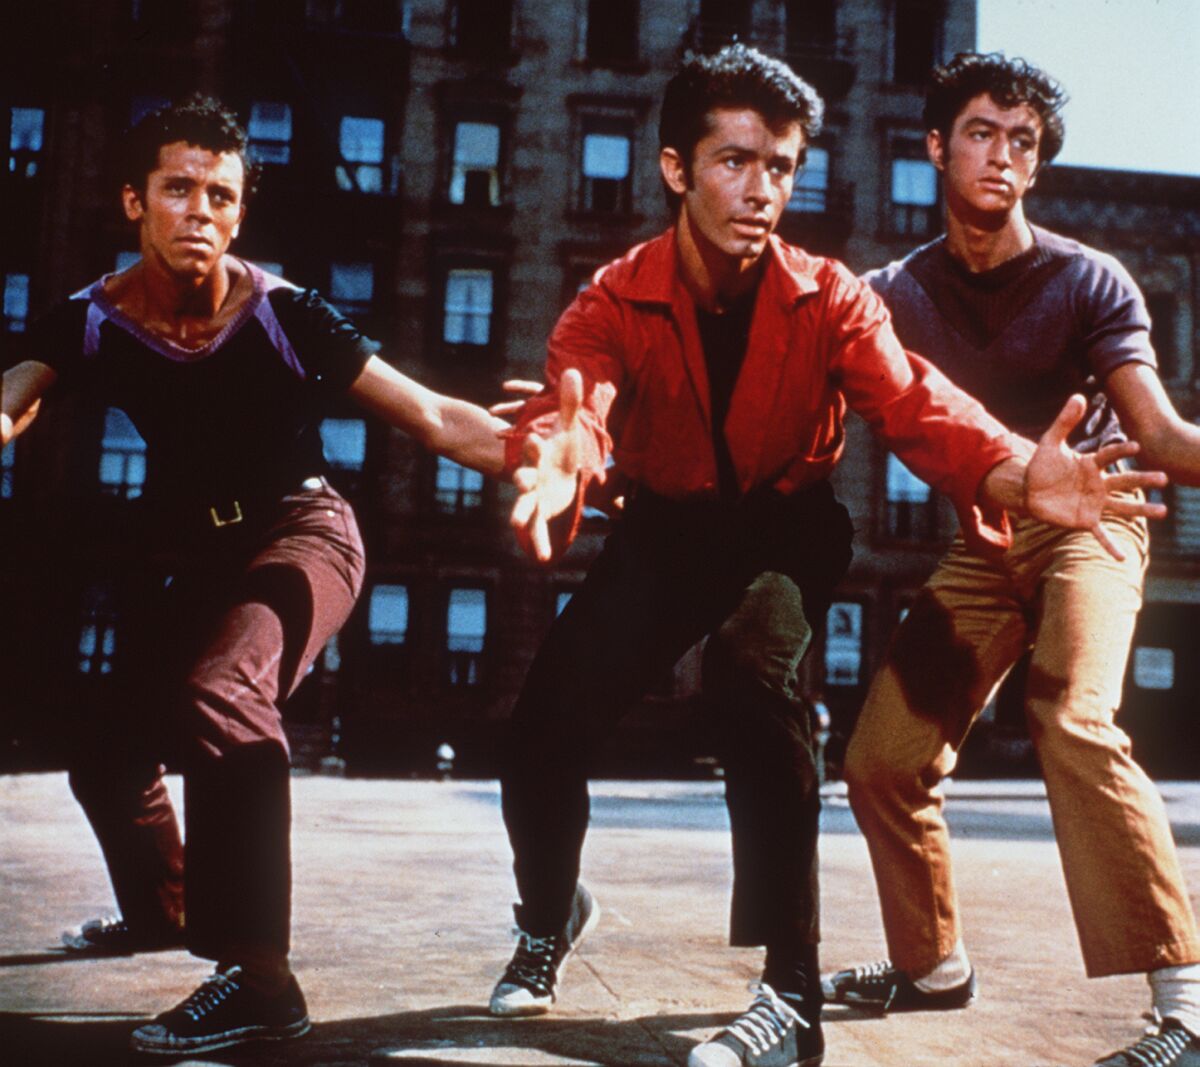  "West Side Story" (1961).